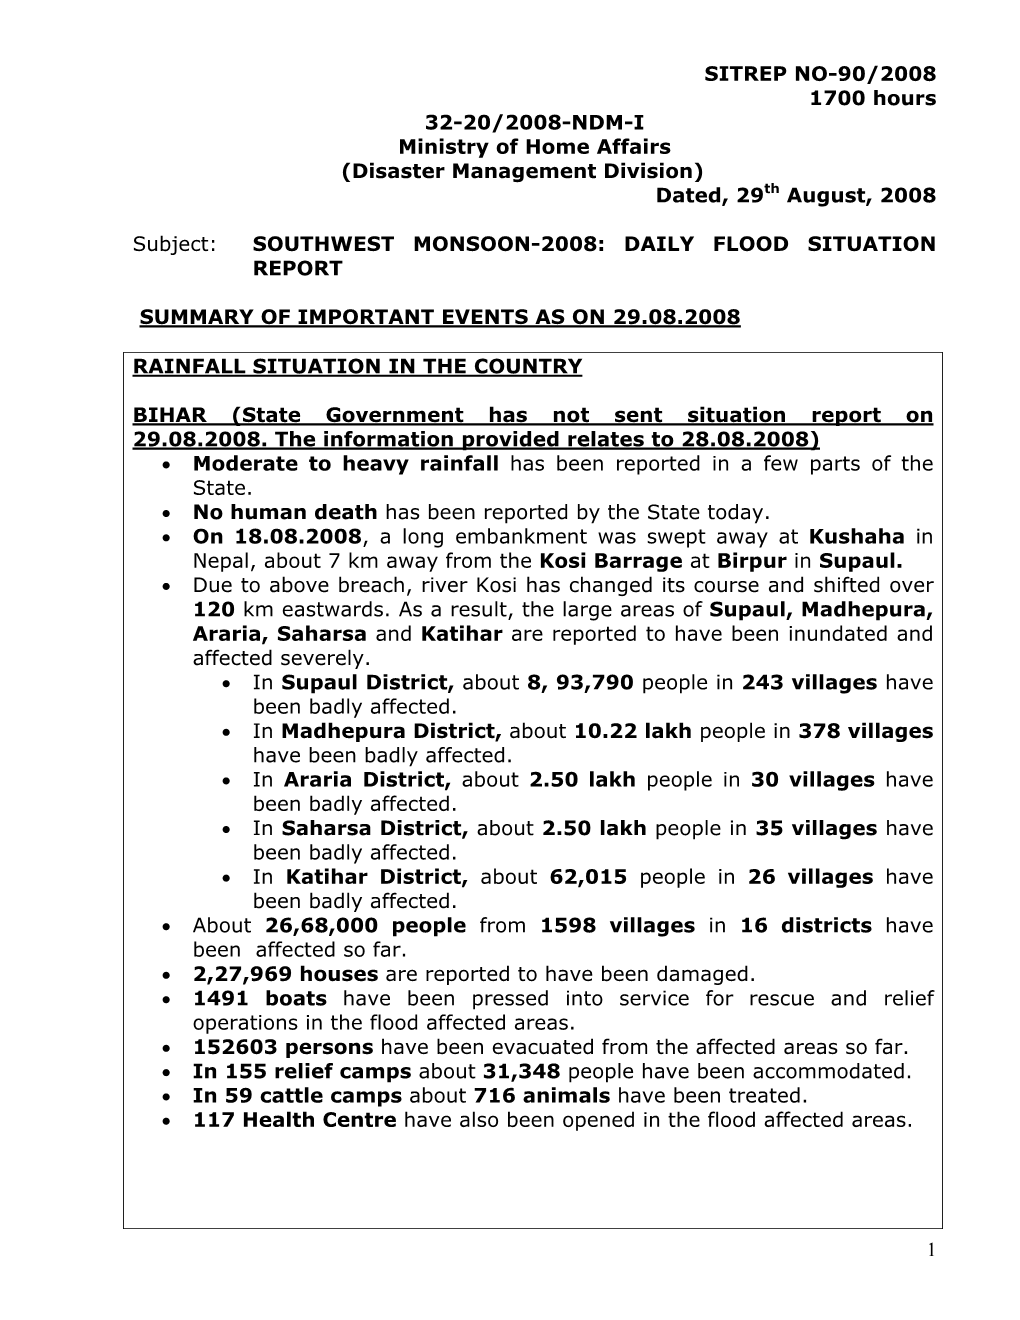 (Disaster Management Division) Dated, 29Th August, 2008